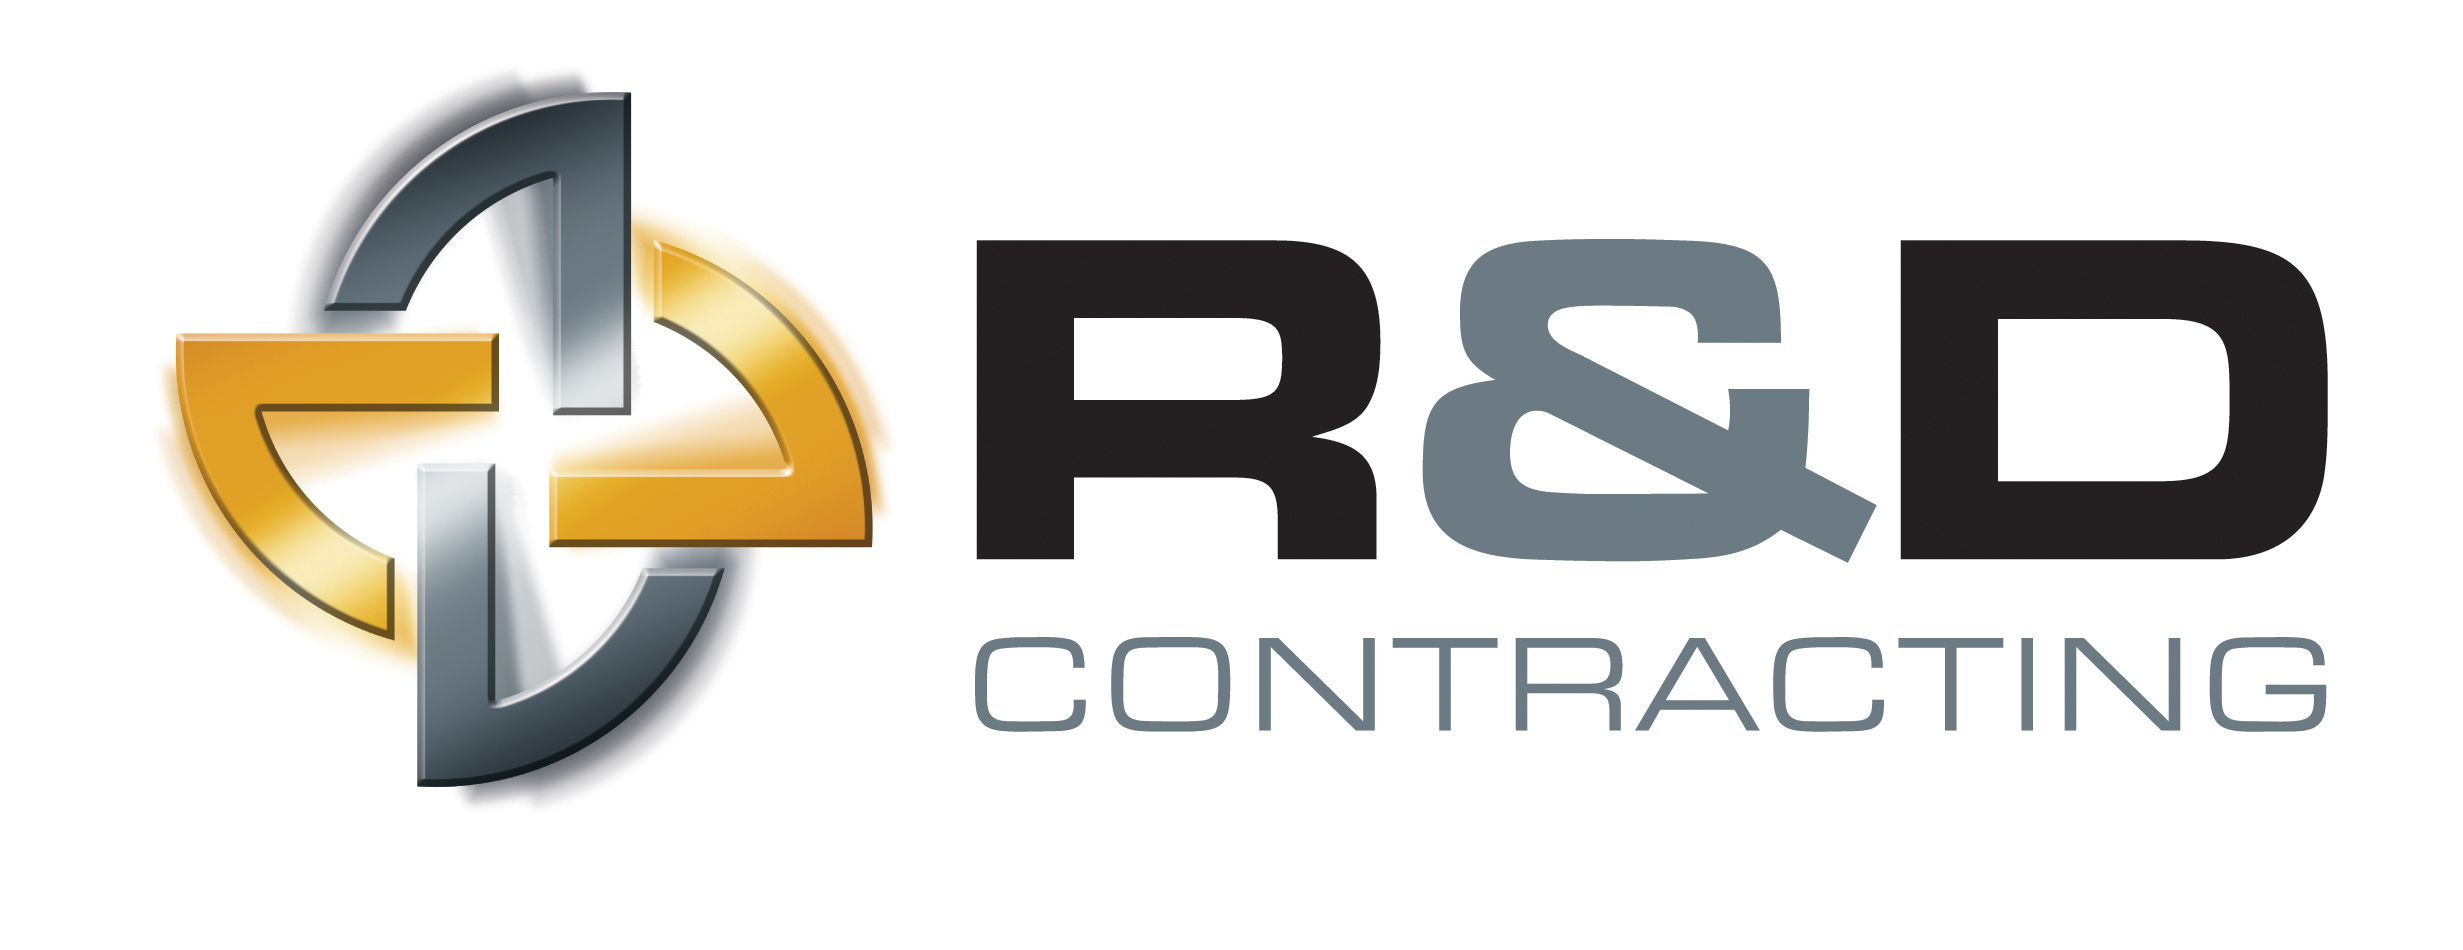 RFT Consulting and Contracting t/a R&D Contracting logo